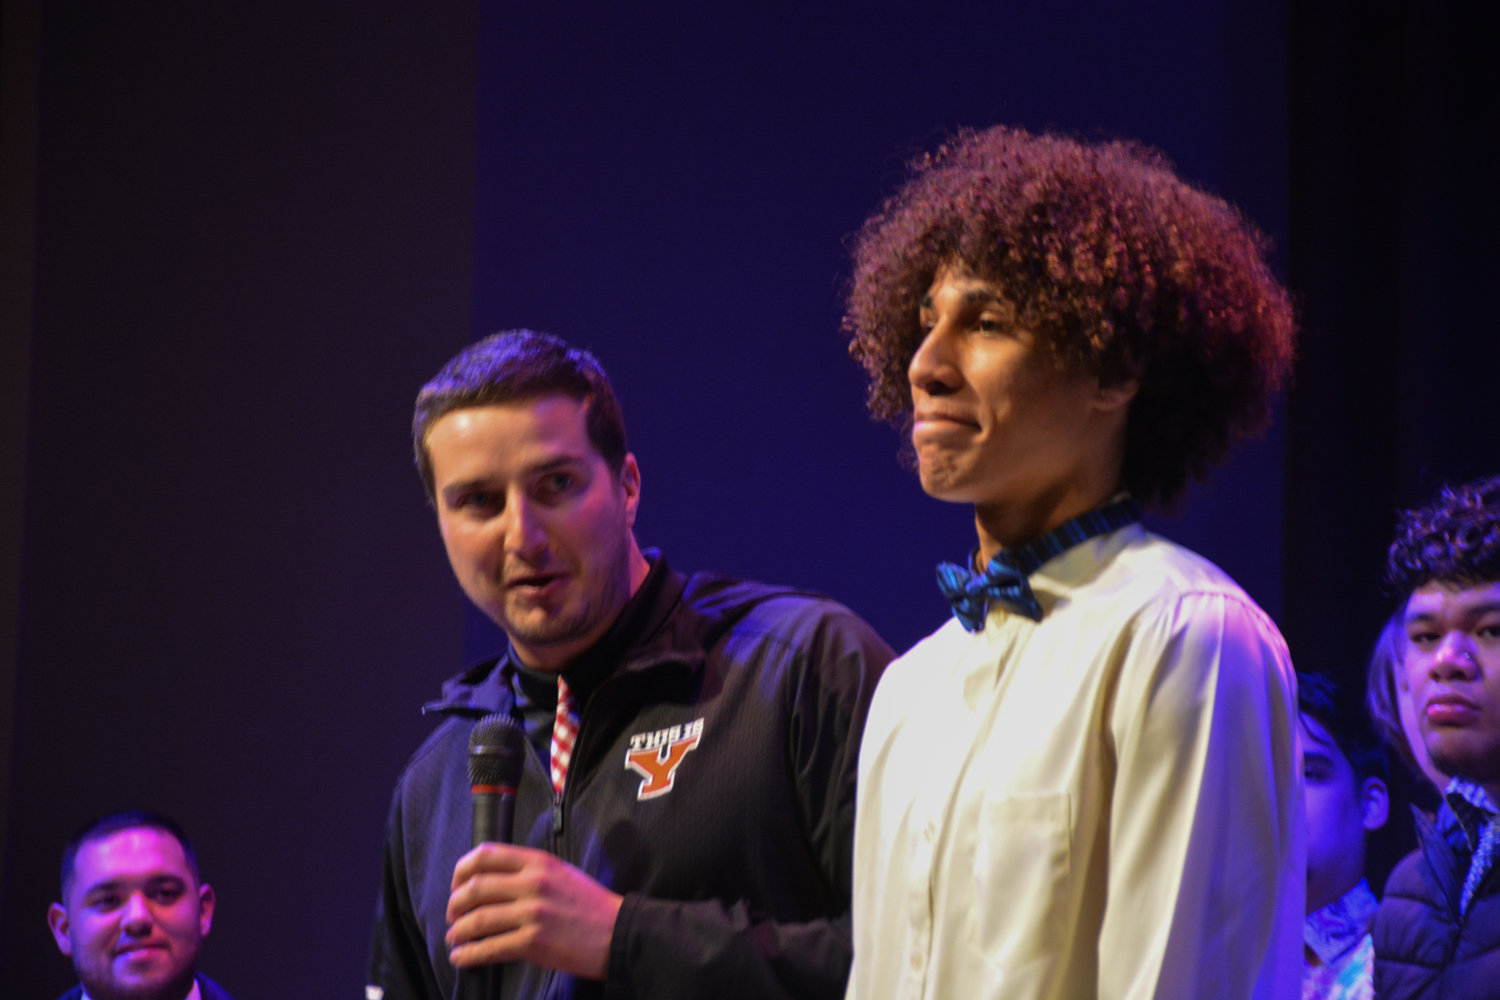 Yelm’s offensive coordinator Bryan Irion shares his favorite memories regarding senior Trevontay Smith, after Smith accepted his varsity letter.